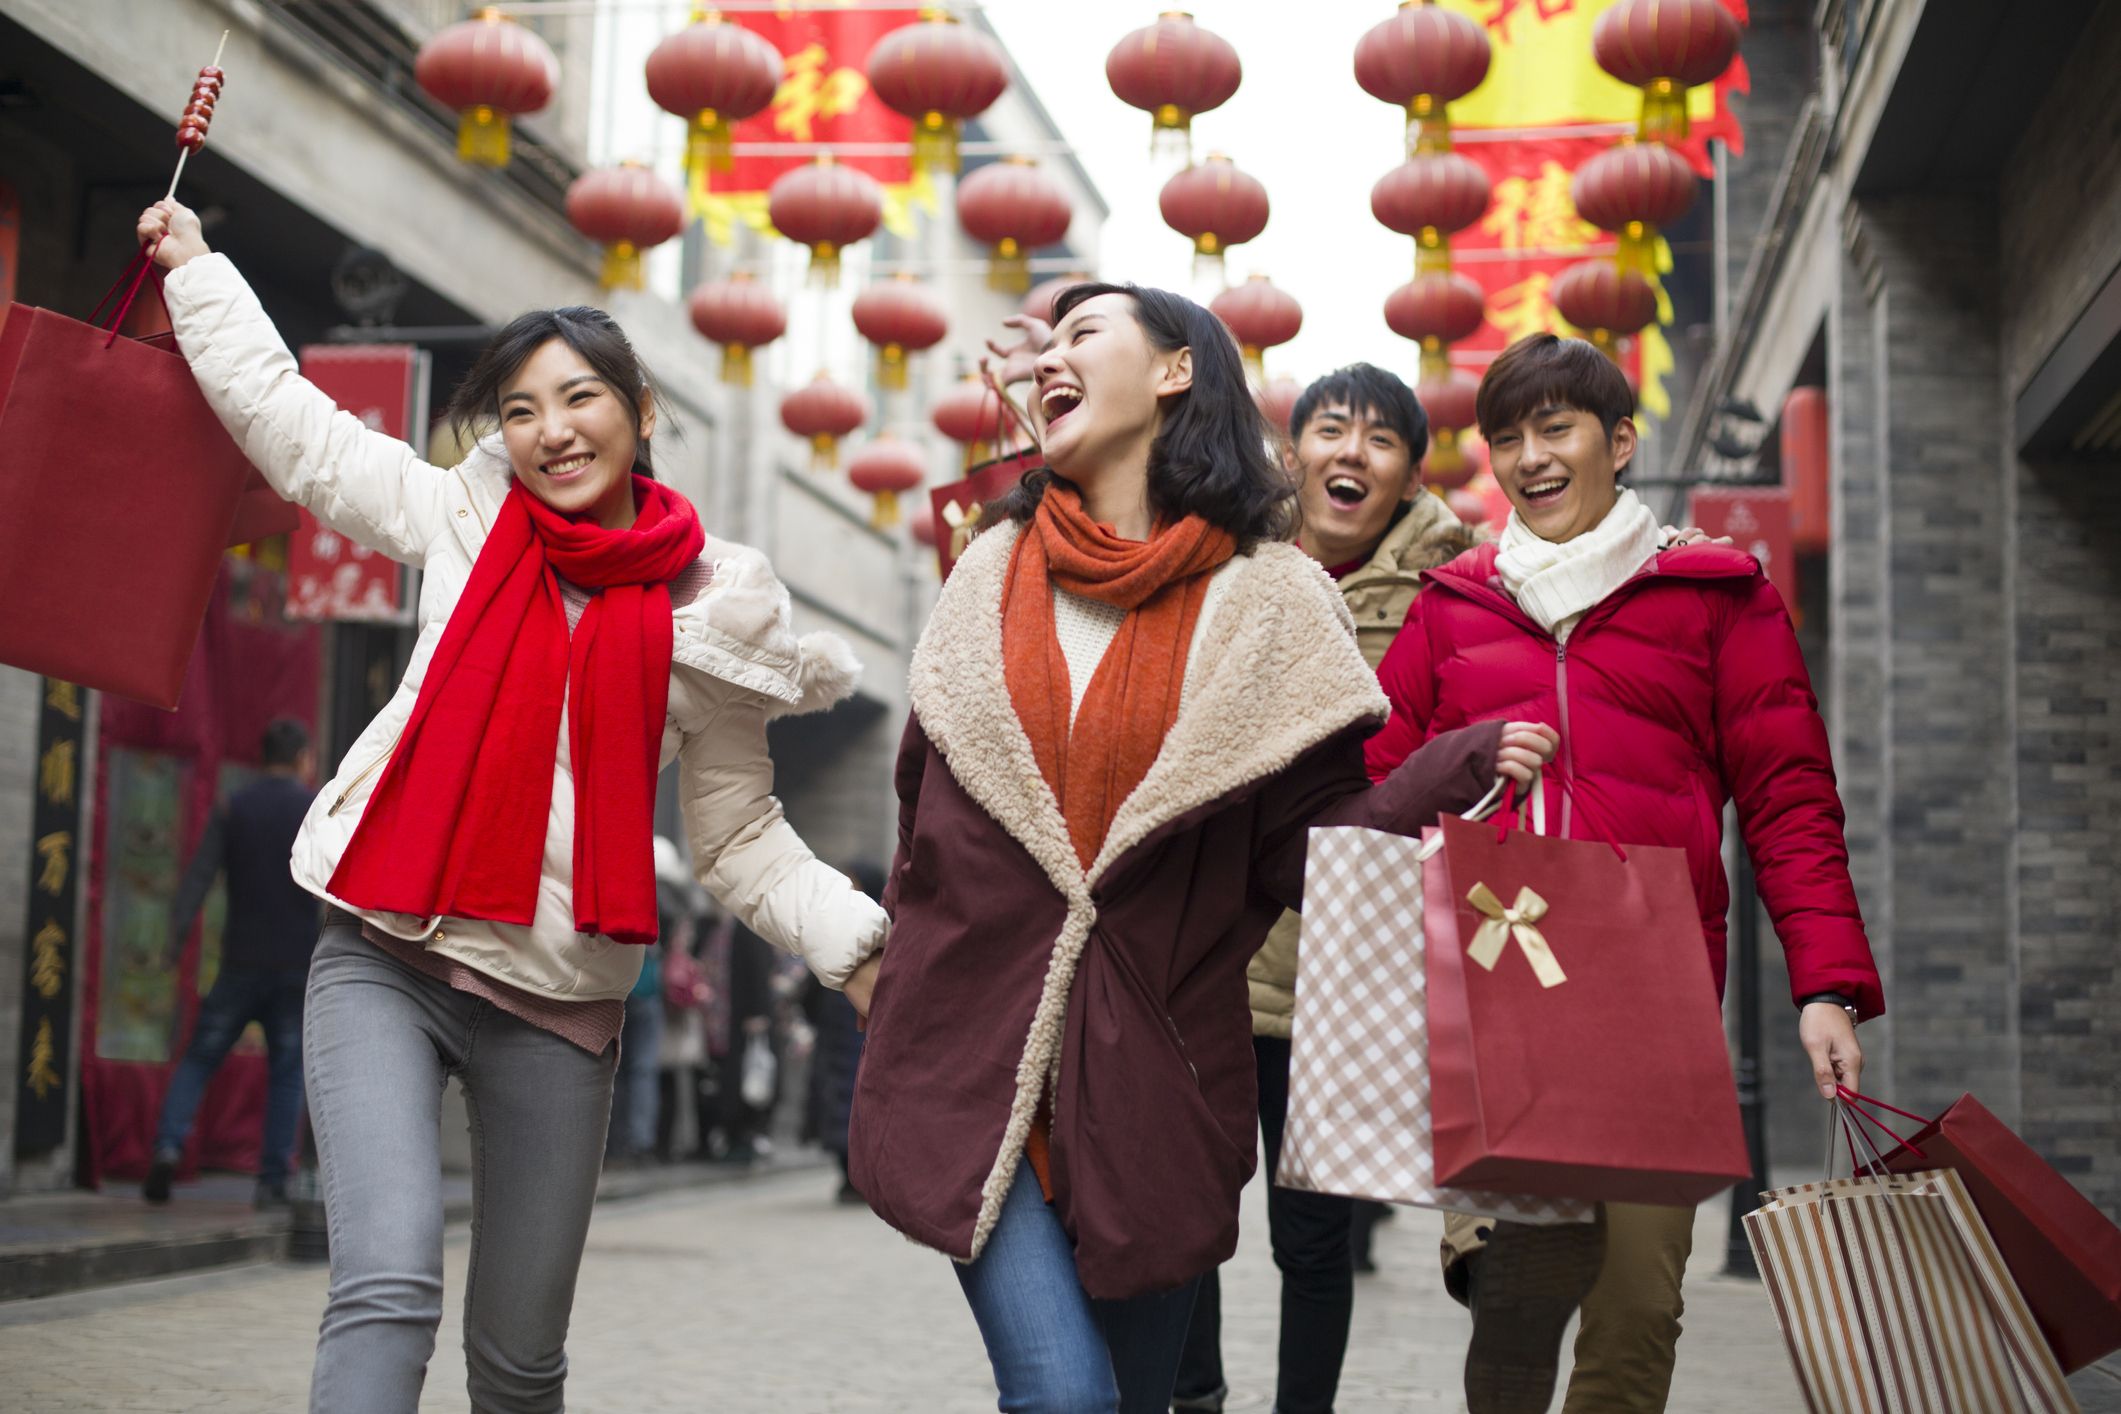 20+ Ways to Say Happy New Year in Chinese: Greetings & Wishes